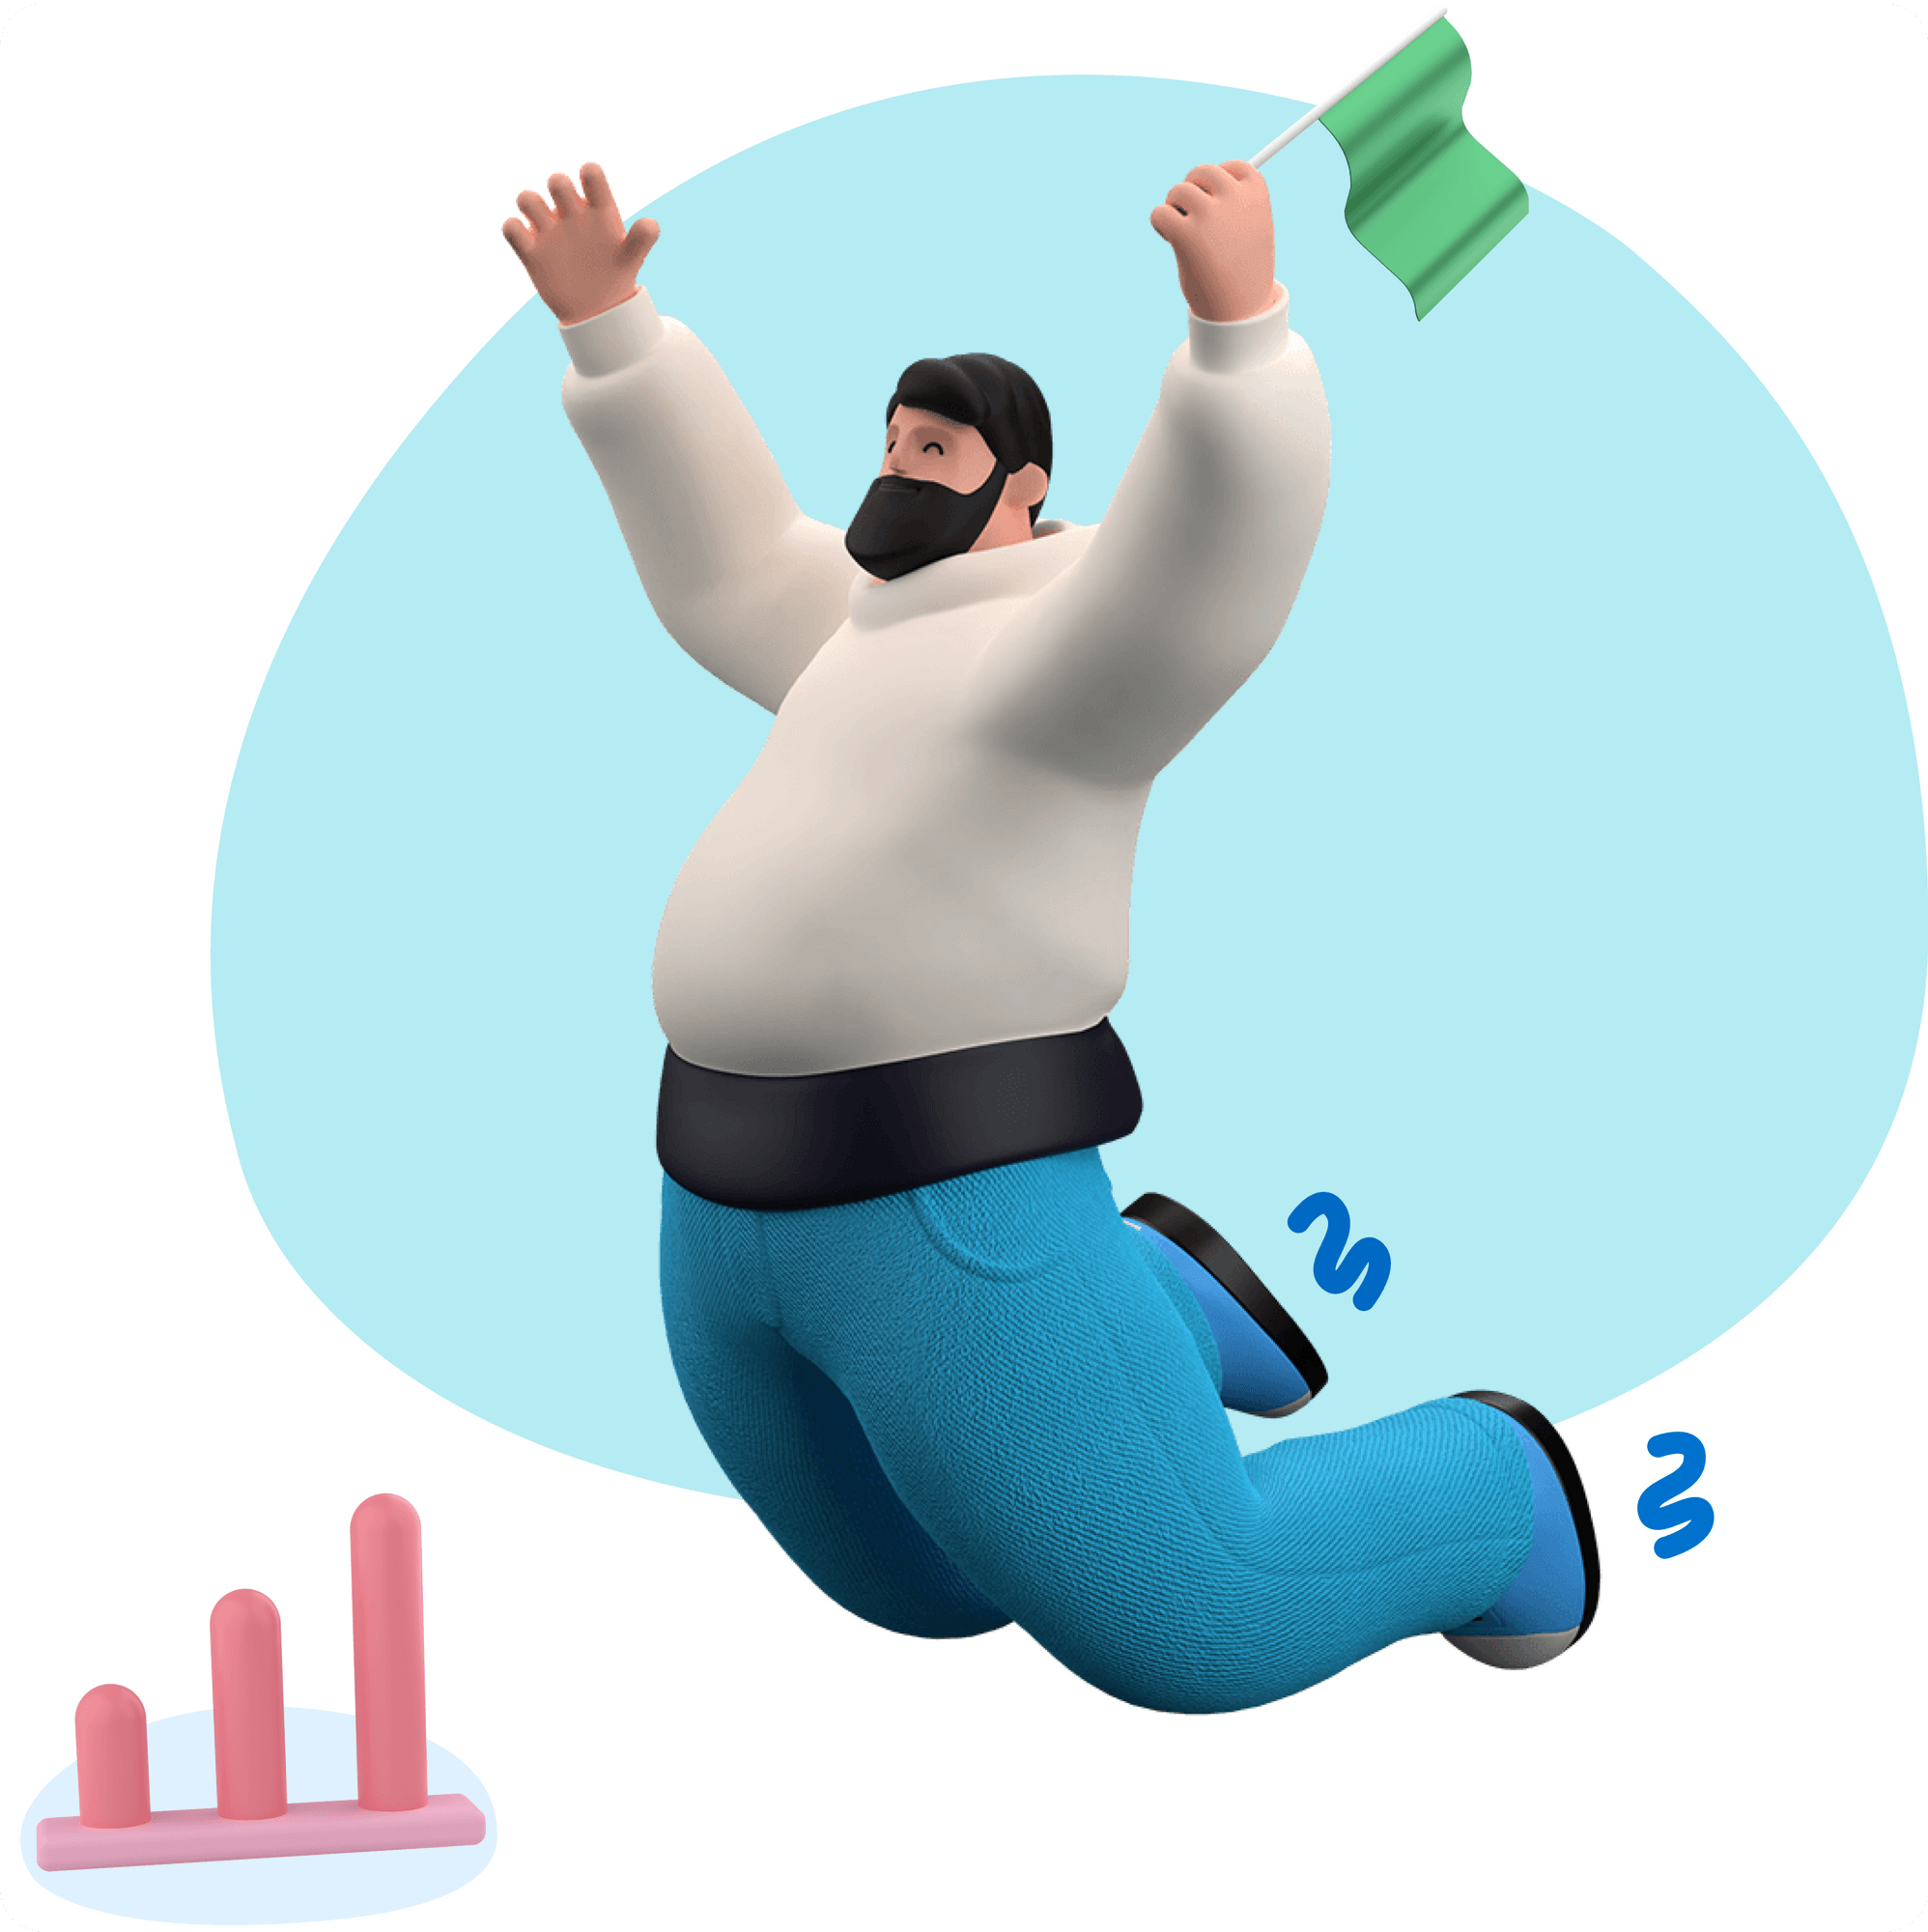 Bearded 3D bubble man jumping with excitement holding a green flag.